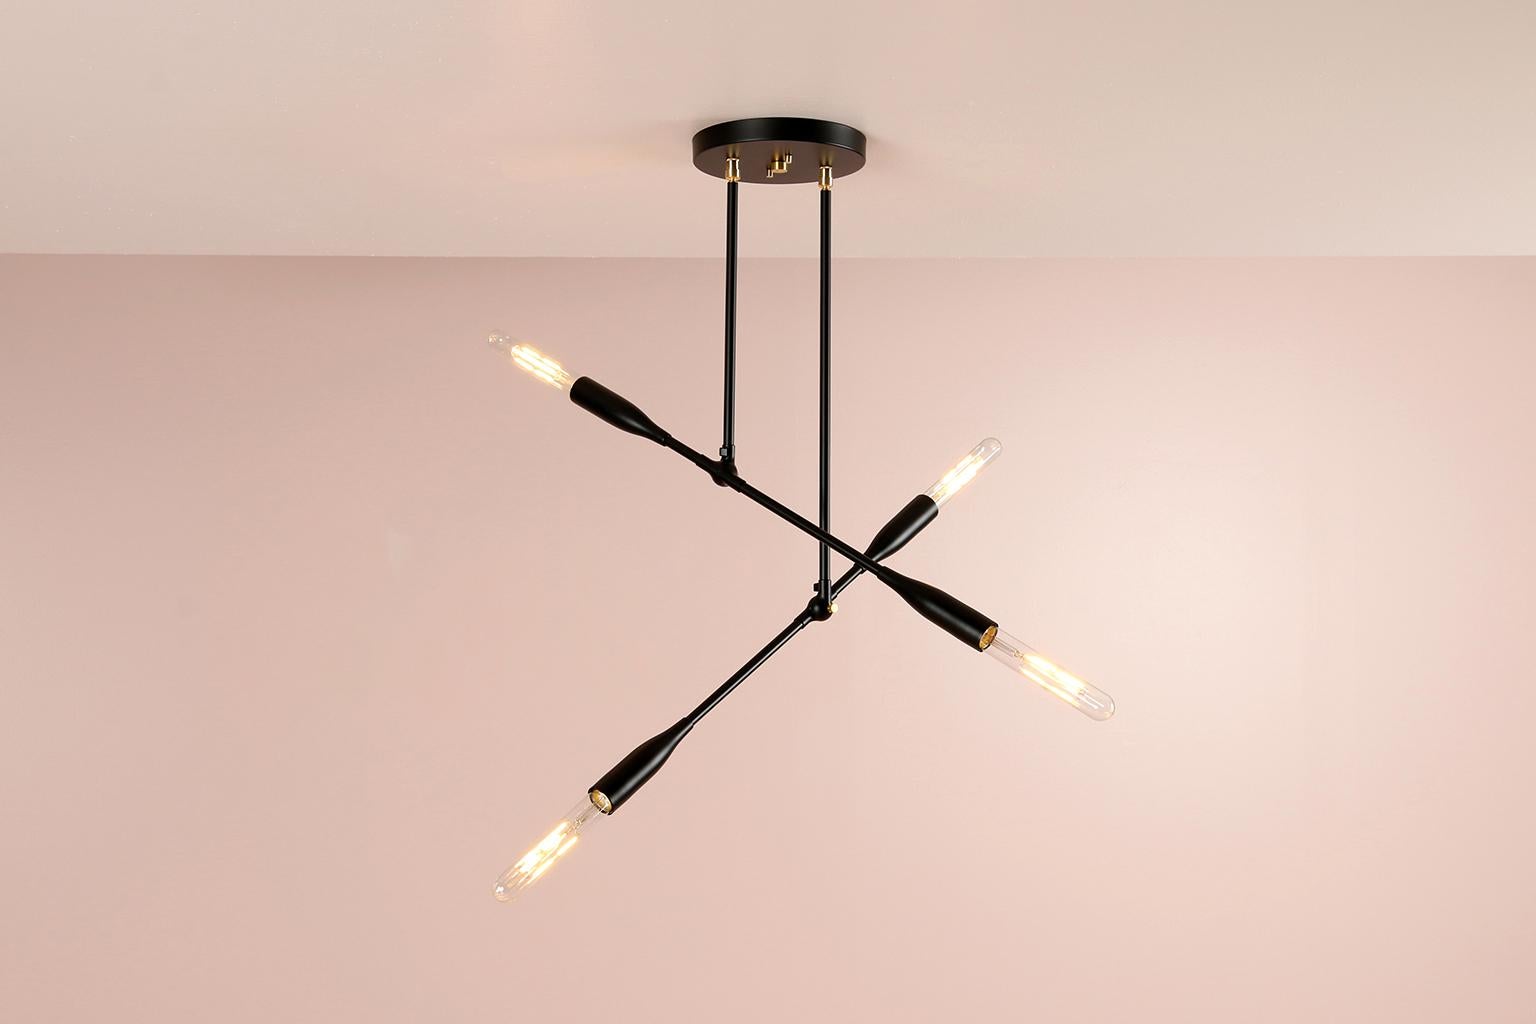 This articulating light fixture works perfectly in small spaces. The modern, linear pendant has bold, elegant lines and dramatic negative space. Hand assembled in our New England studio, the custom light fixture features two lighting arms that can